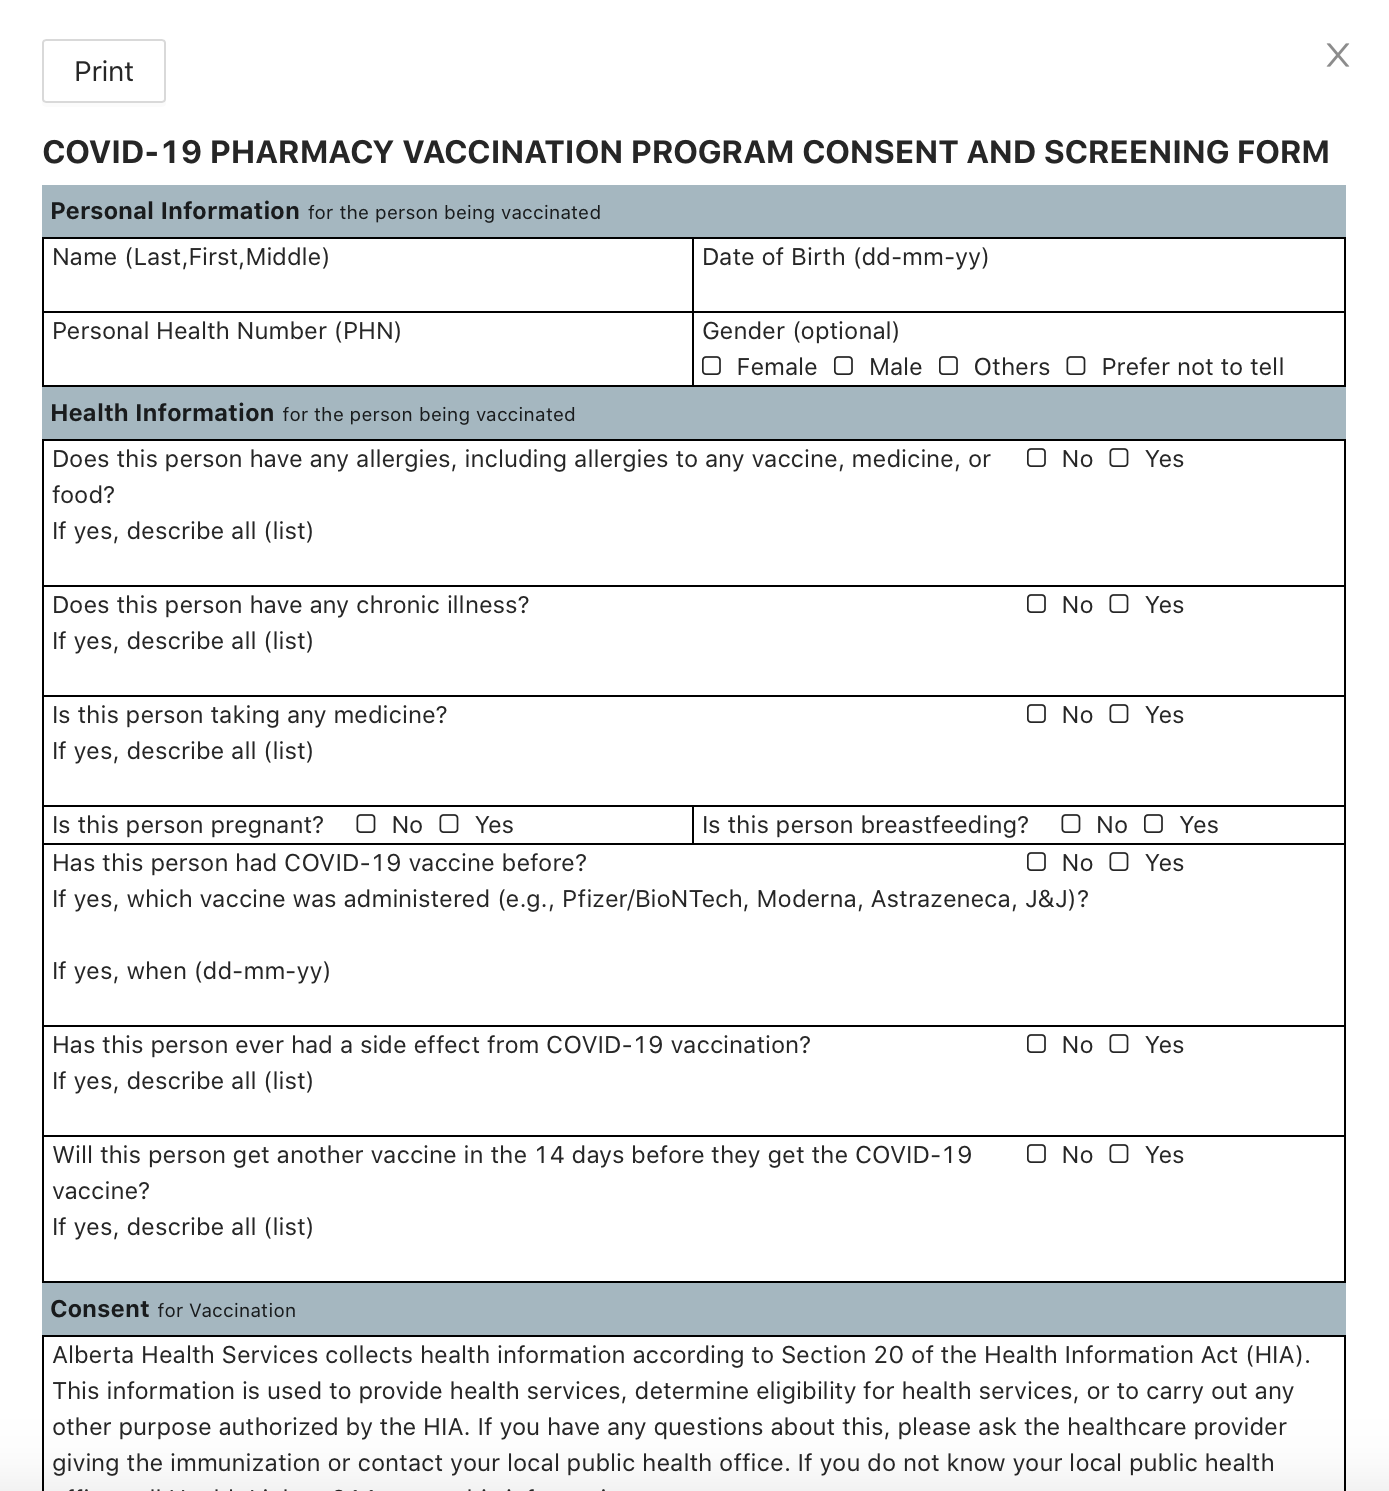 Covid-19 Vaccination screening and consent form